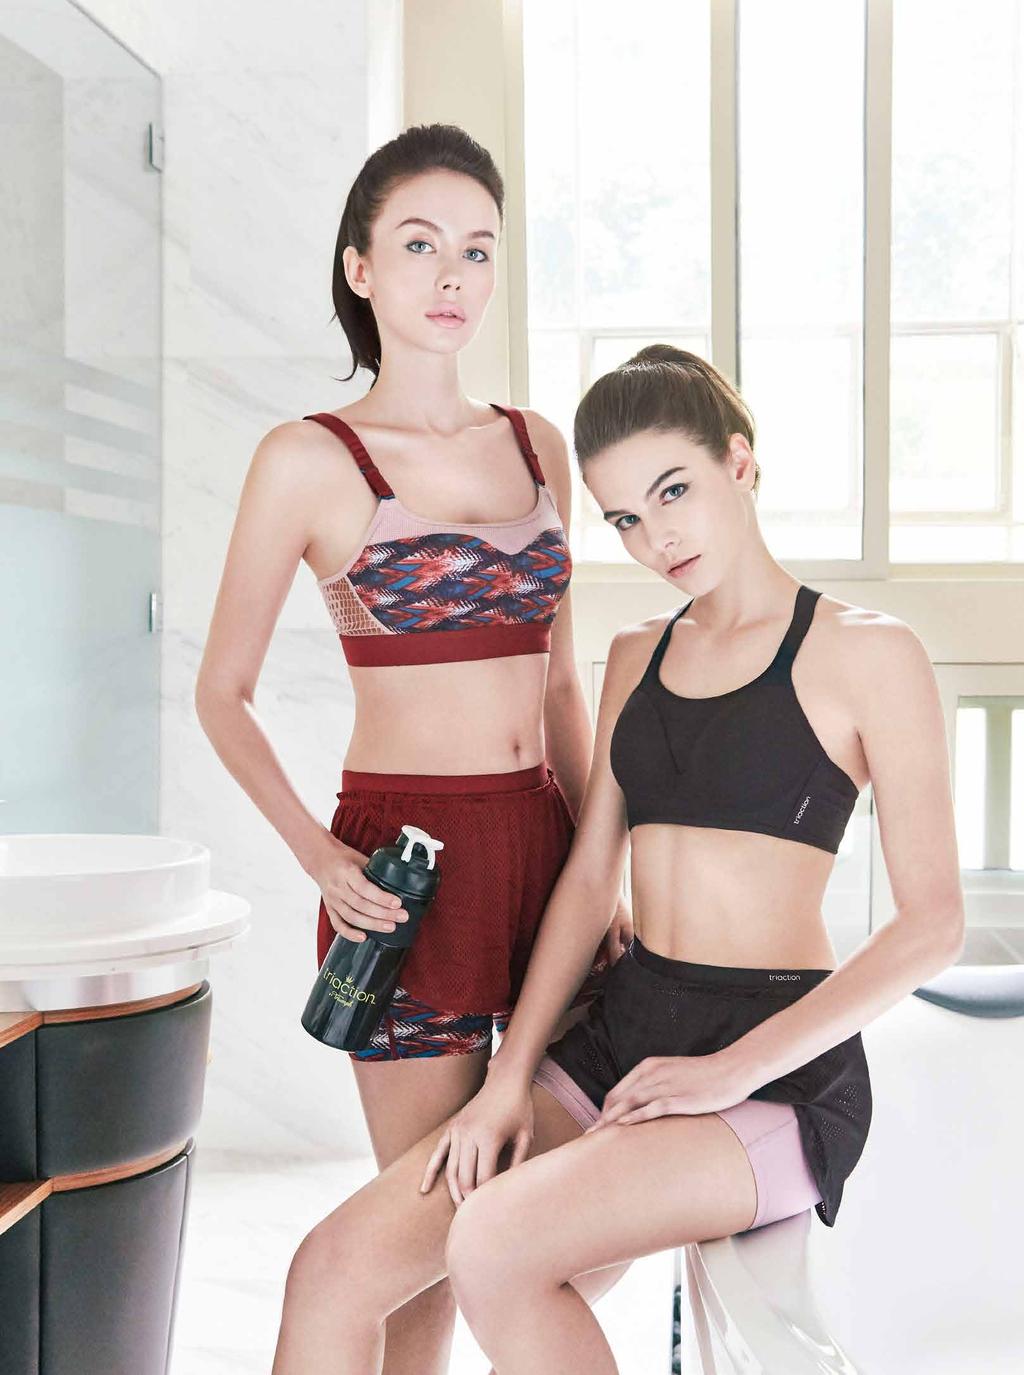 Triaction functional, fashionable workout gear Not all sports bras are made equal; the kind of workout determines the type of support you need.